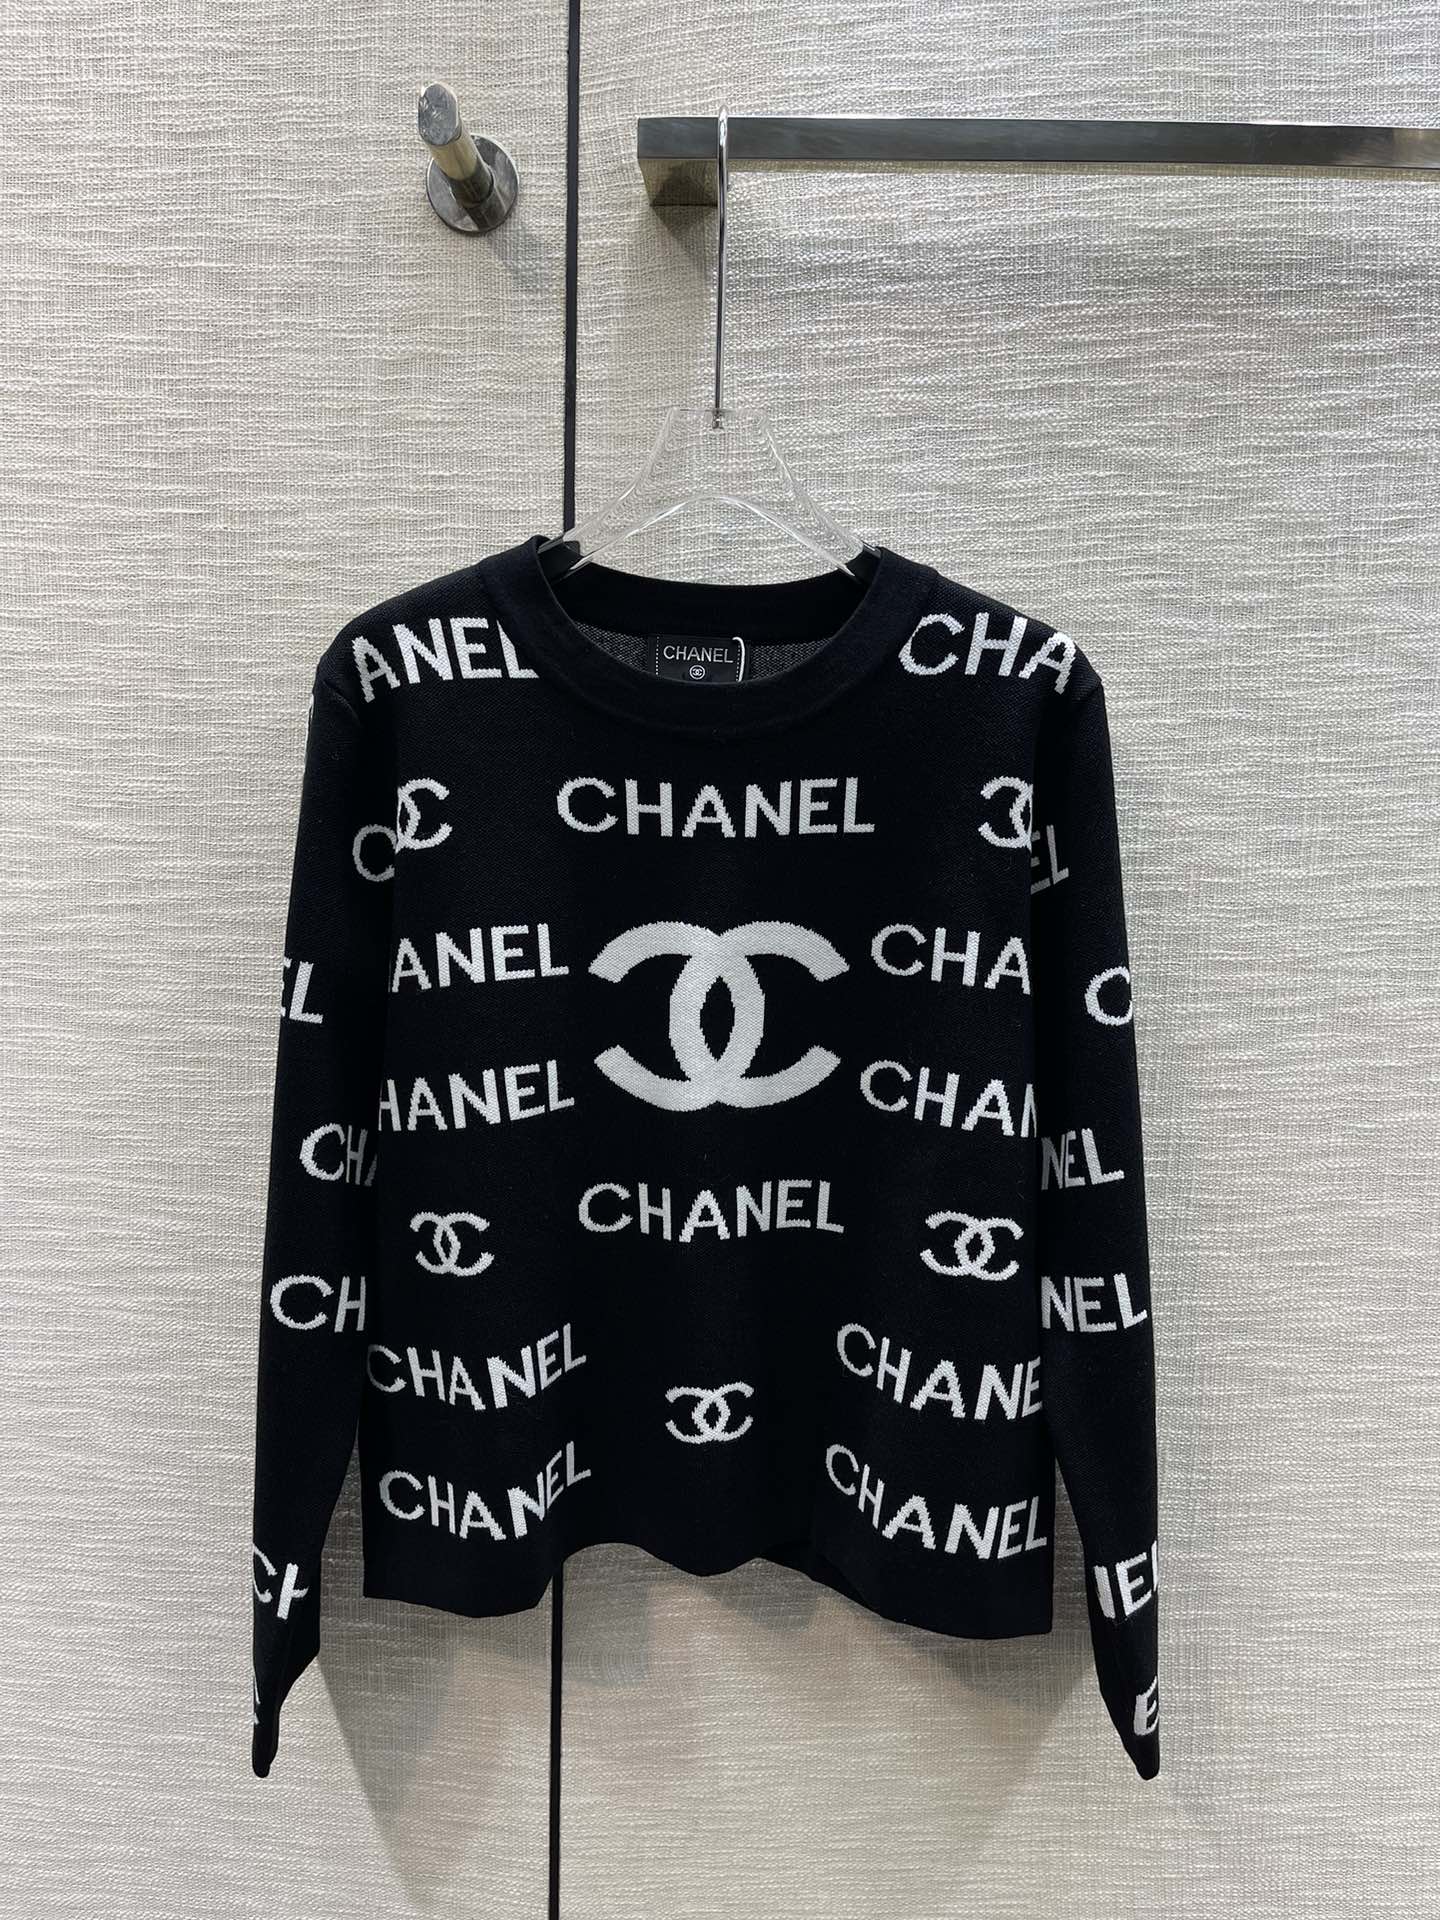 Chanel Clothing Knit Sweater Sweatshirts 7 Star Quality Designer Replica
 Cashmere Knitting Wool Fall/Winter Collection